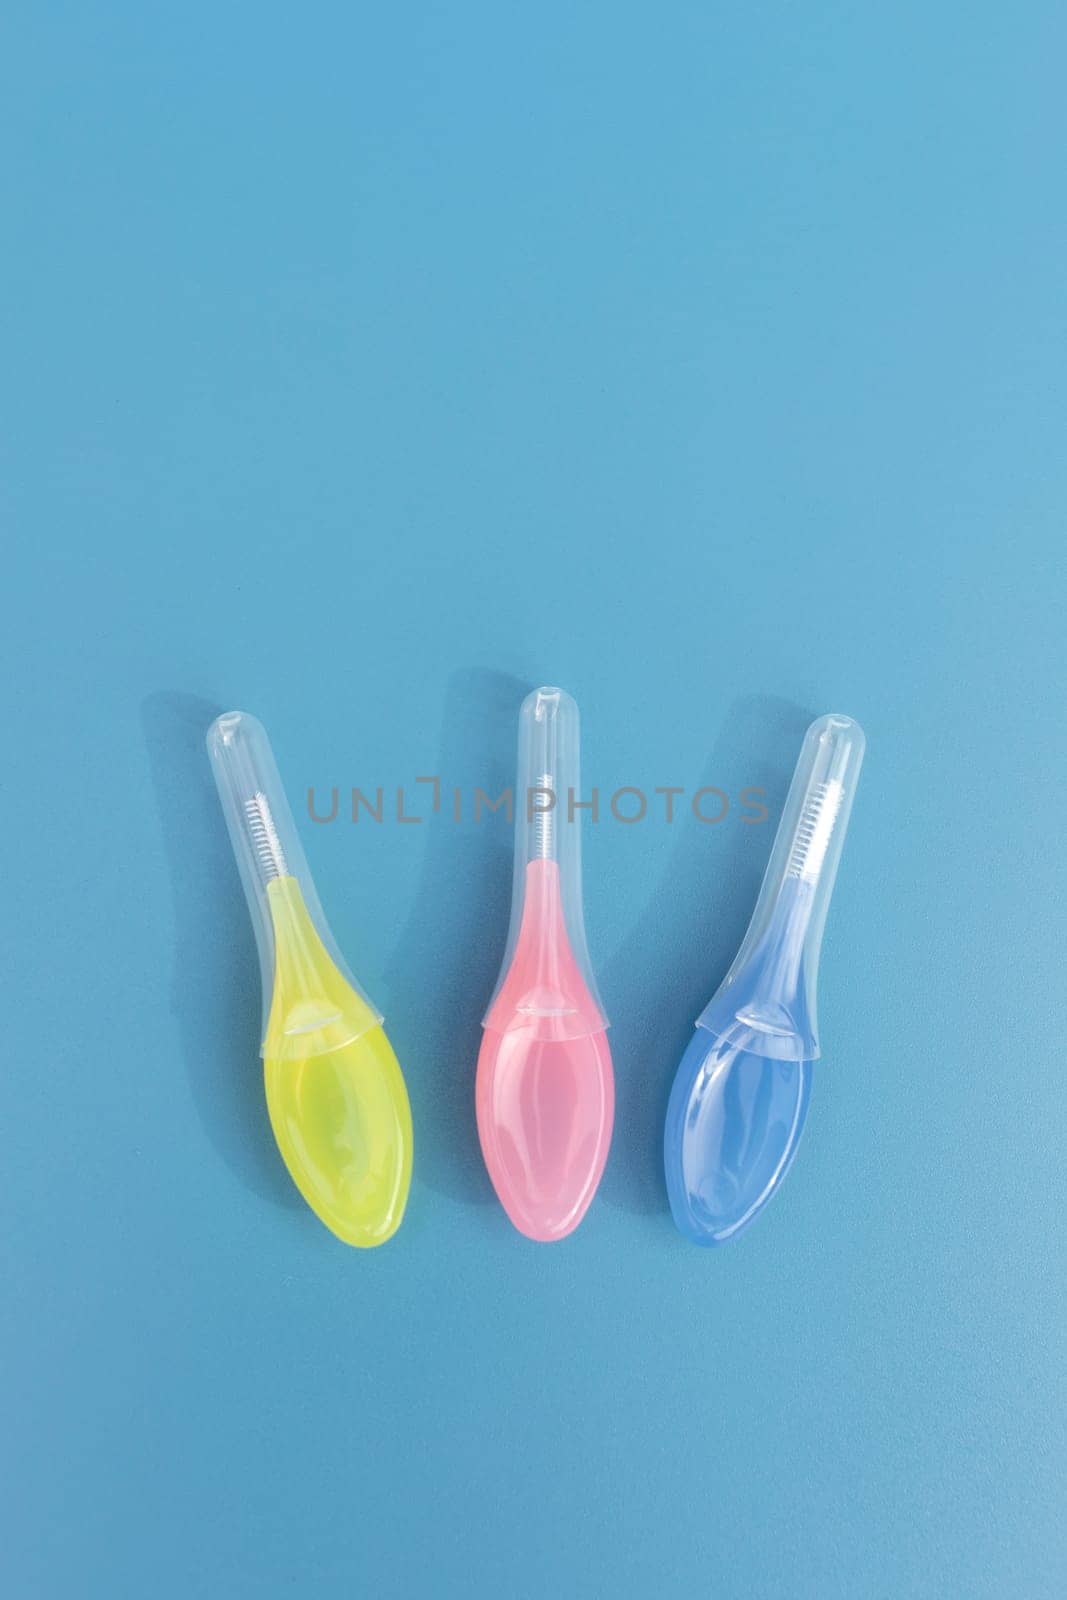 Template Colorful Dental Brushes Between Teeth Gum Braces on Blue Background, Interdental Brush Toothpick with Soft Bristles, Oral Tooth Cleaning Tool. Vertical Plane, Copy Space For Text. High quality